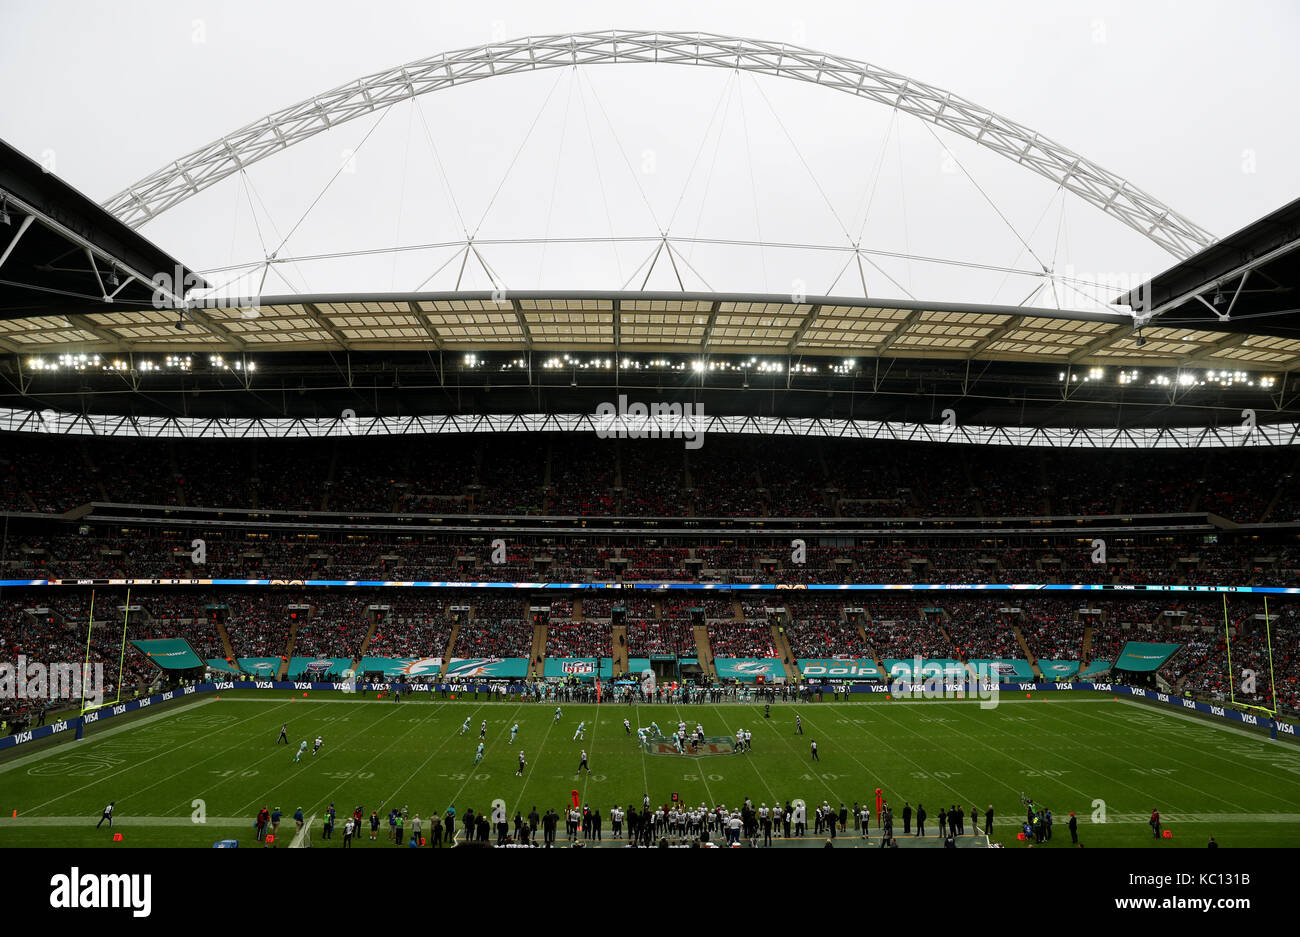 Match action between the Miami Dolphins and New Orleans Saints during the NFL International Series match at Wembley Stadium, London. Stock Photo